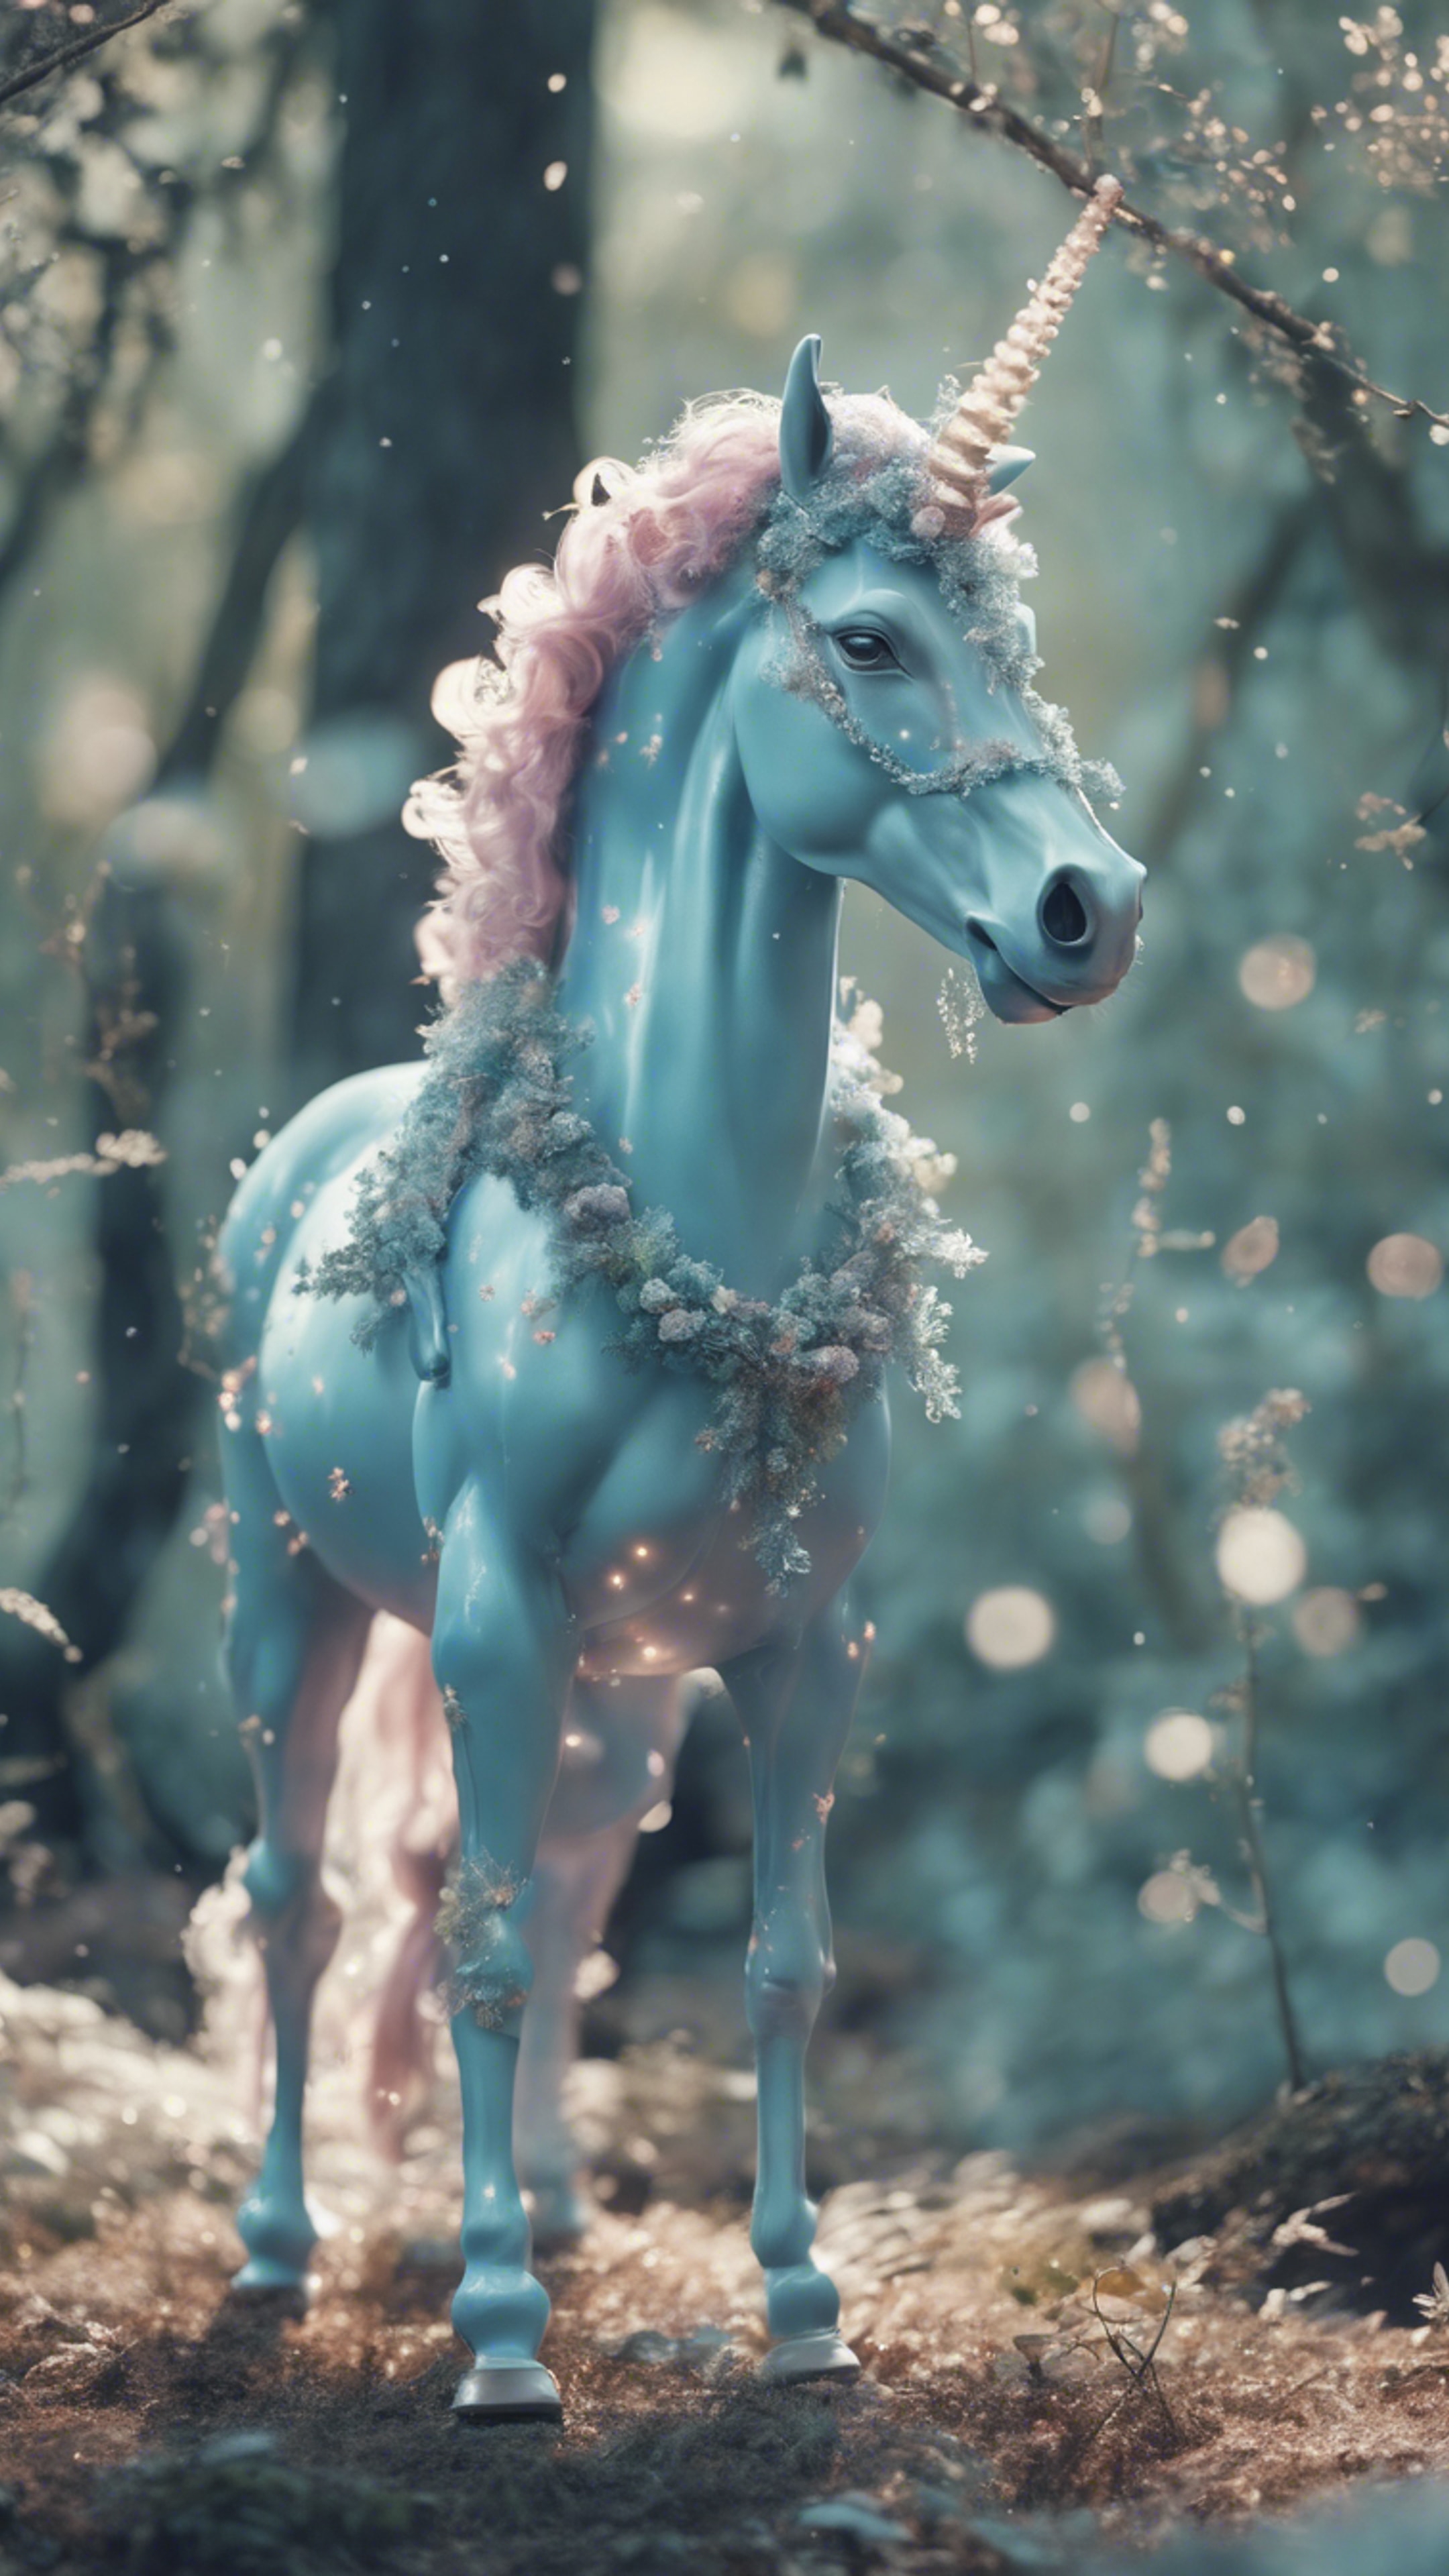 A whimsical pastel blue unicorn standing in a magical forest. Tapeta[9fc4aee892994beaa25a]